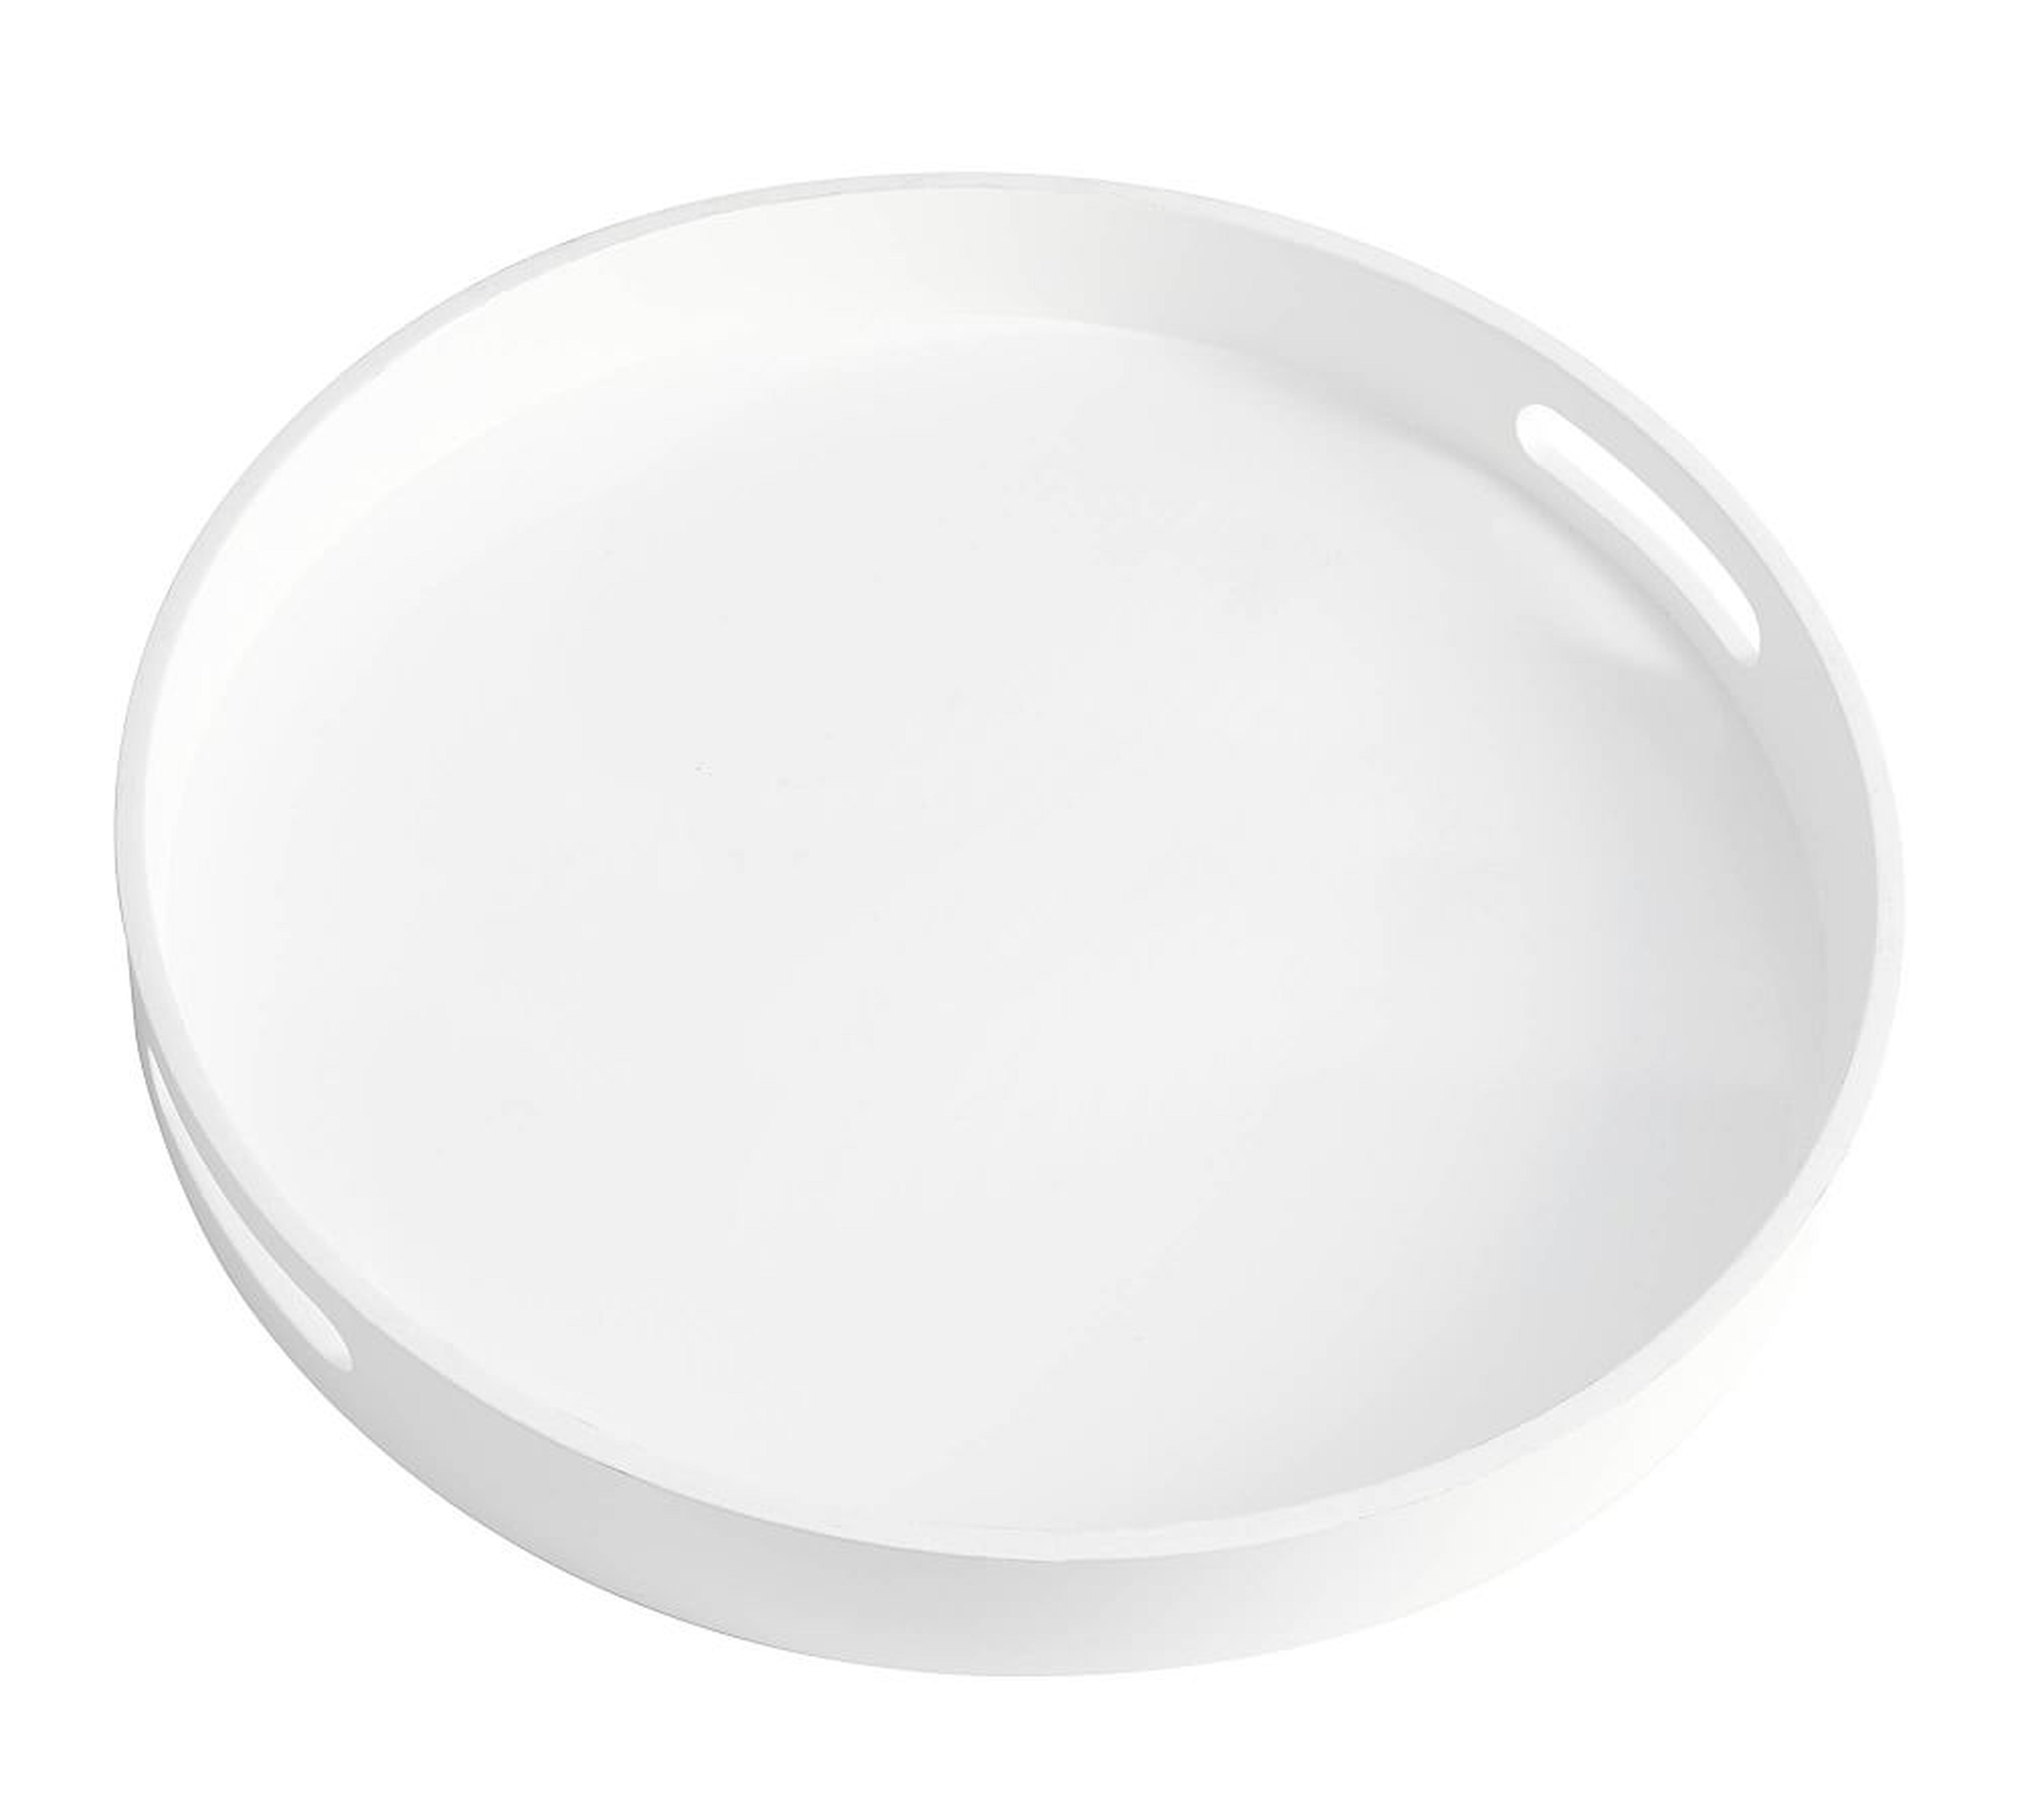 Lacquer Serving Tray - White - Pottery Barn